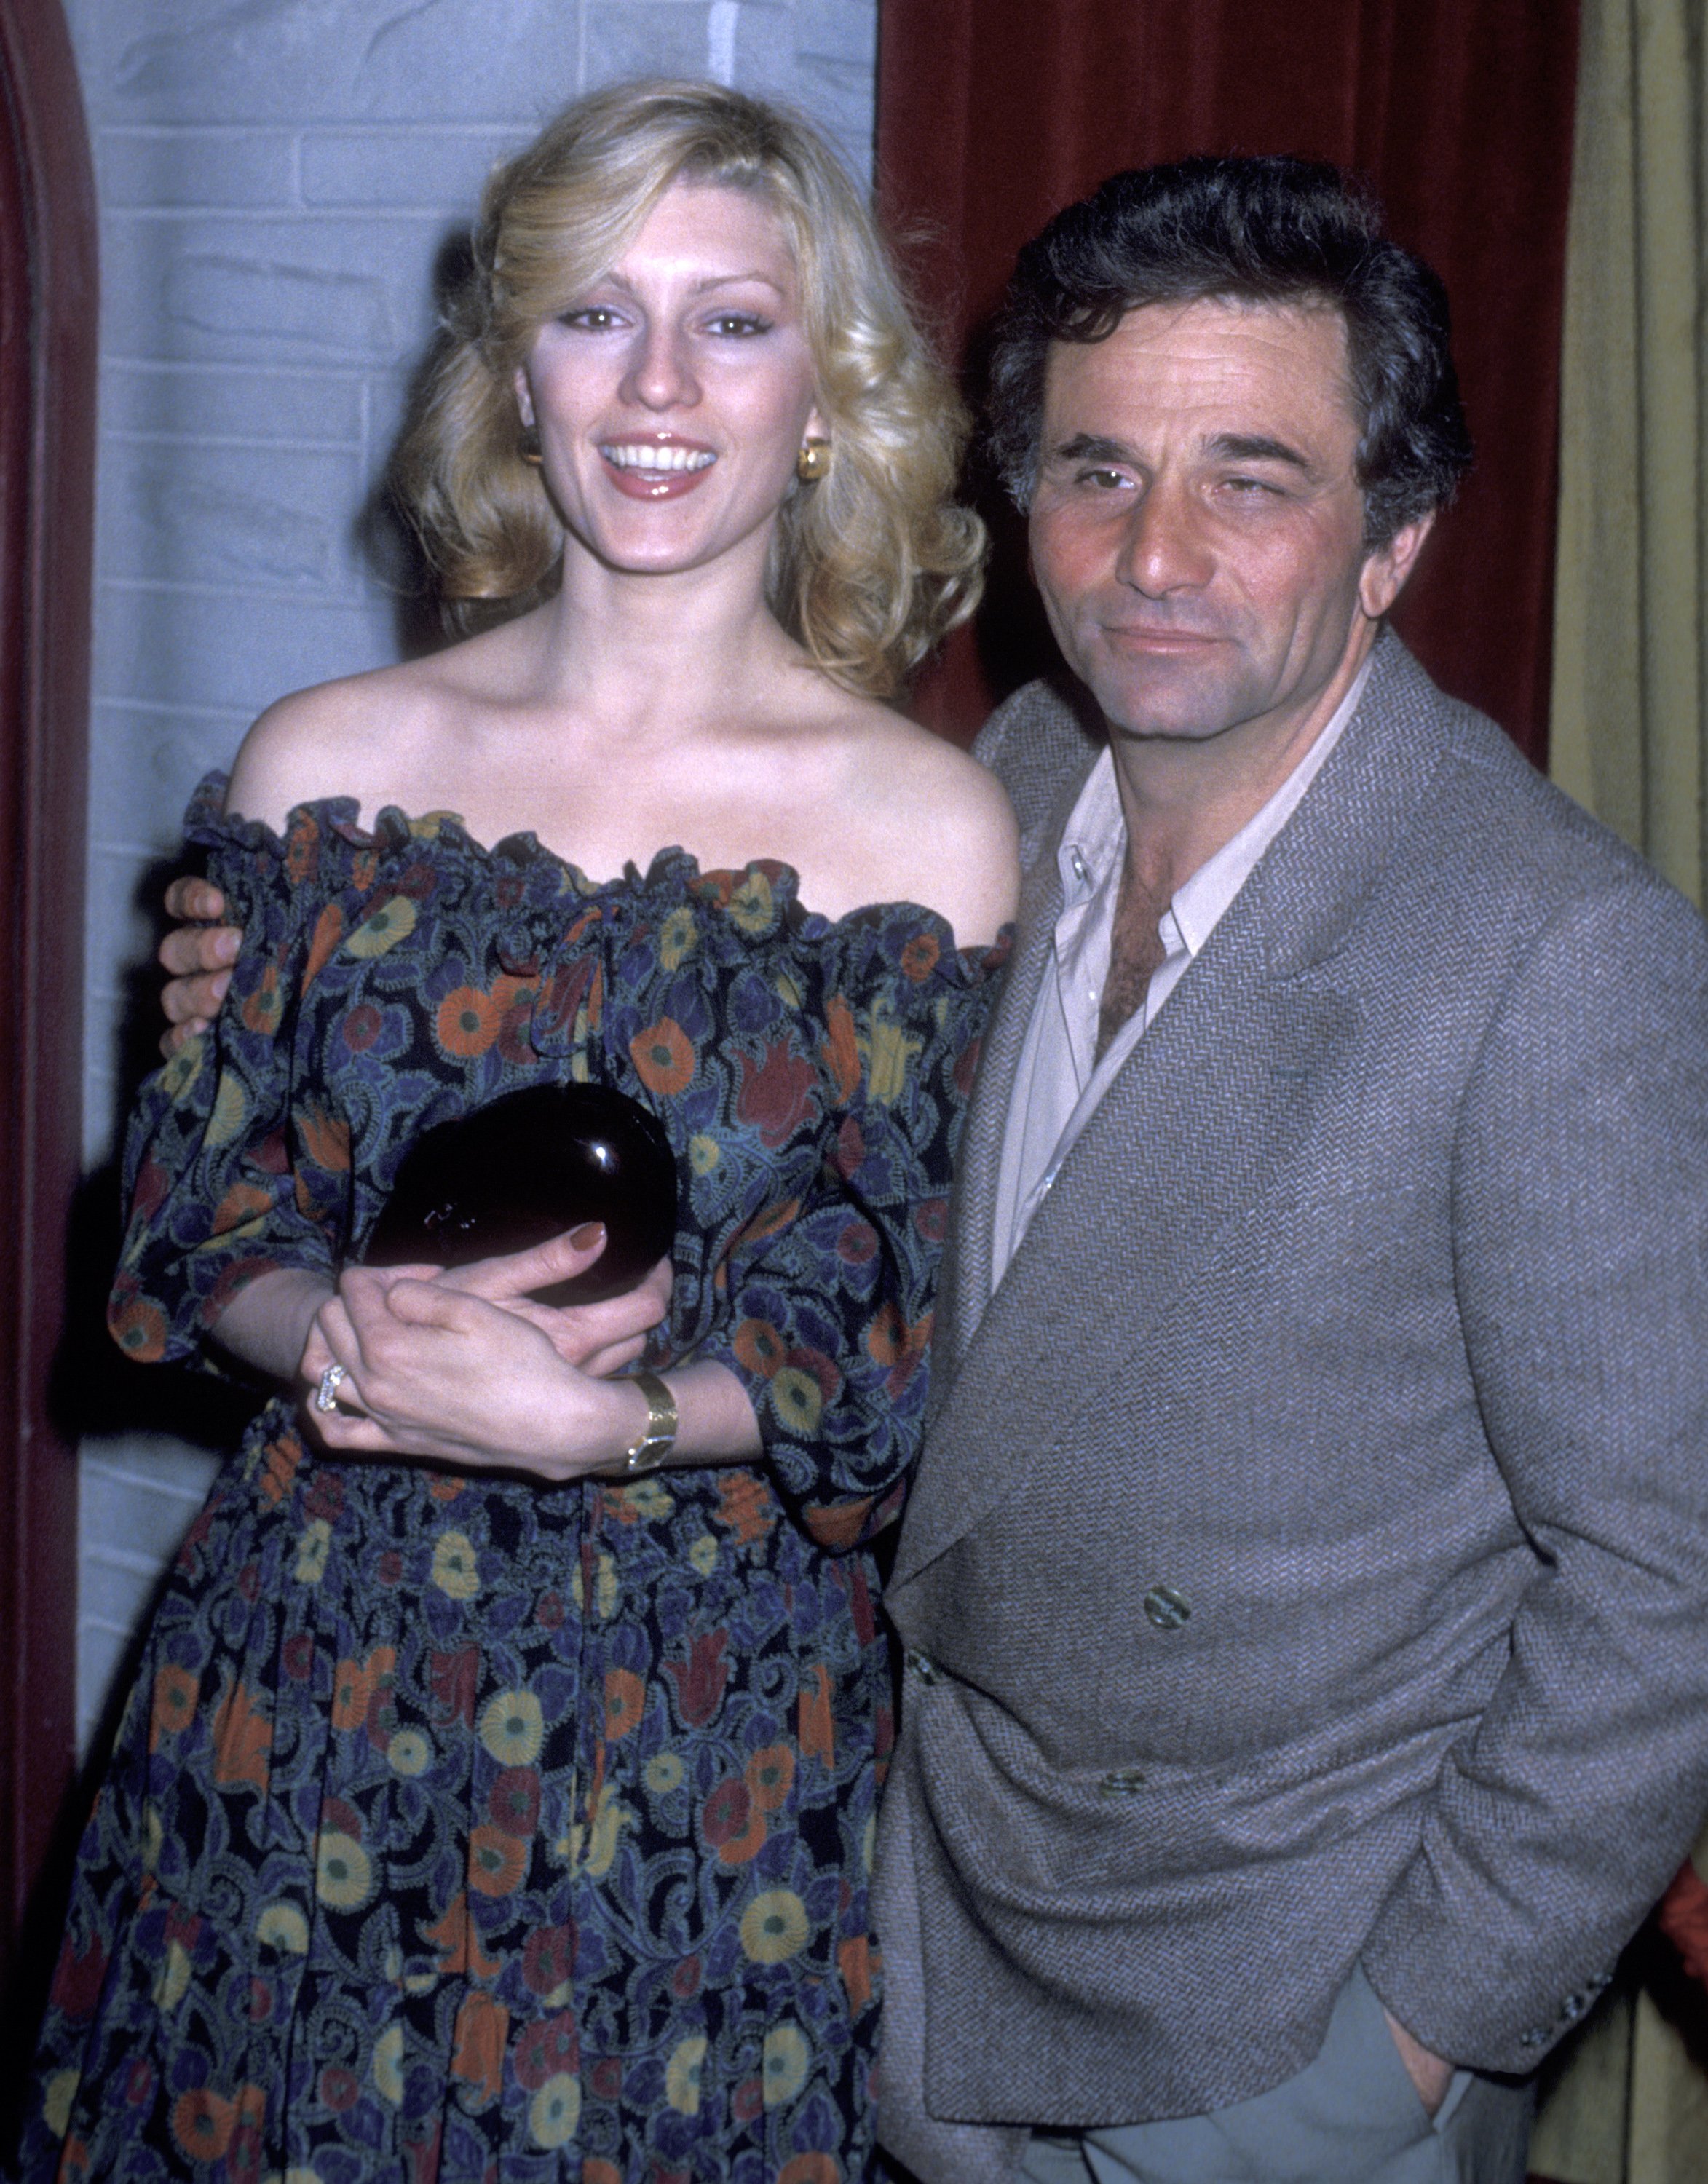 Actor Peter Falk and wife Shera Danese attend the "Paradise Alley" Film Wrap-Up Party on February 11, 1978, at Universal Studios in Universal City, California. | Source: Getty Images